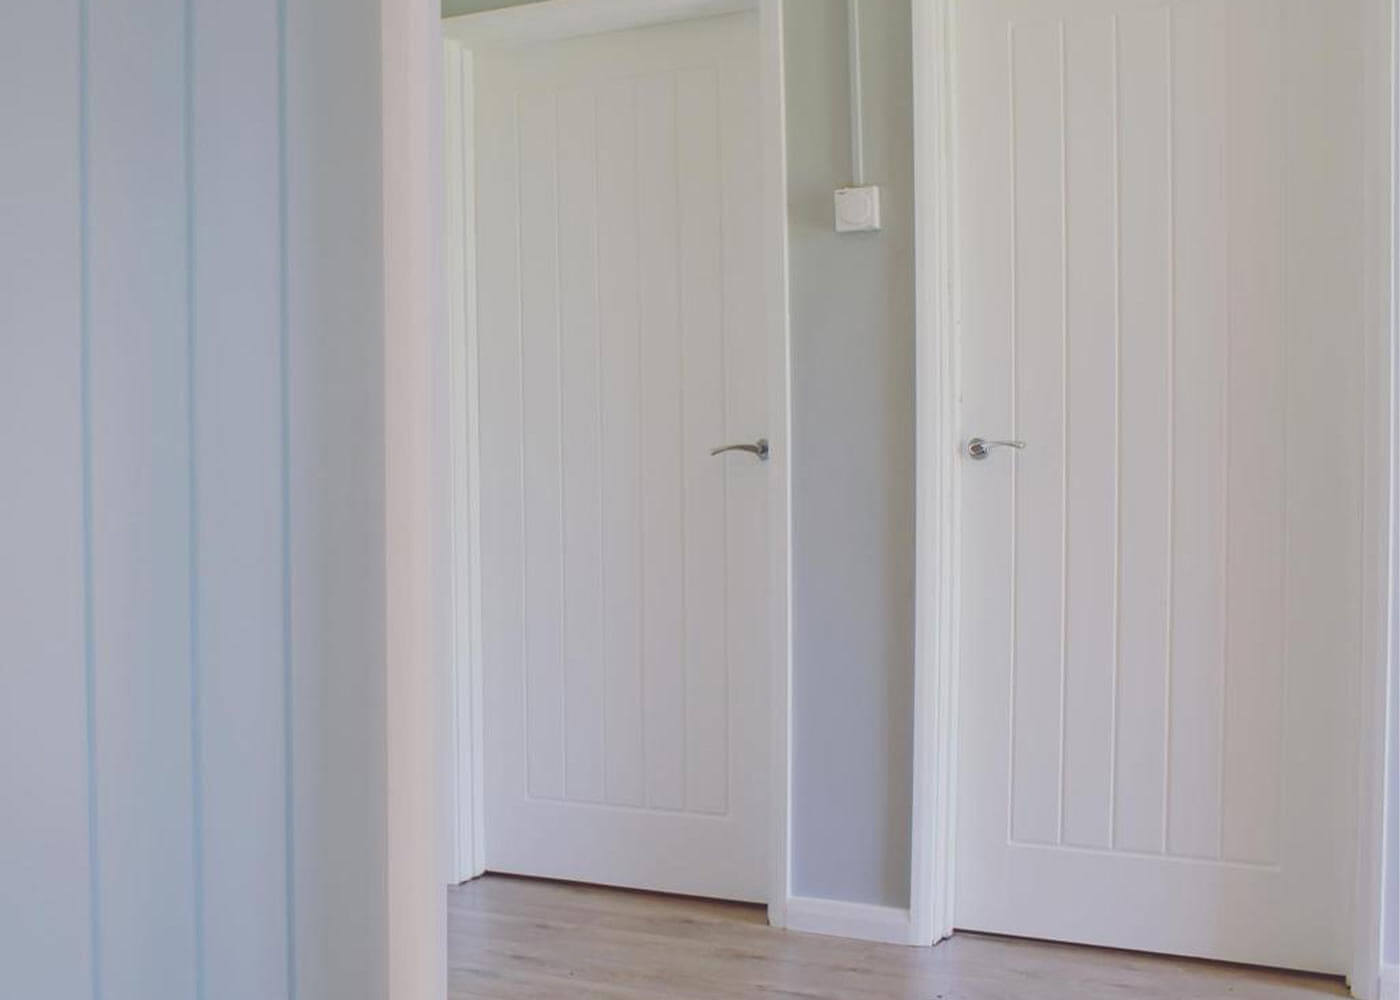 Doors and skirting